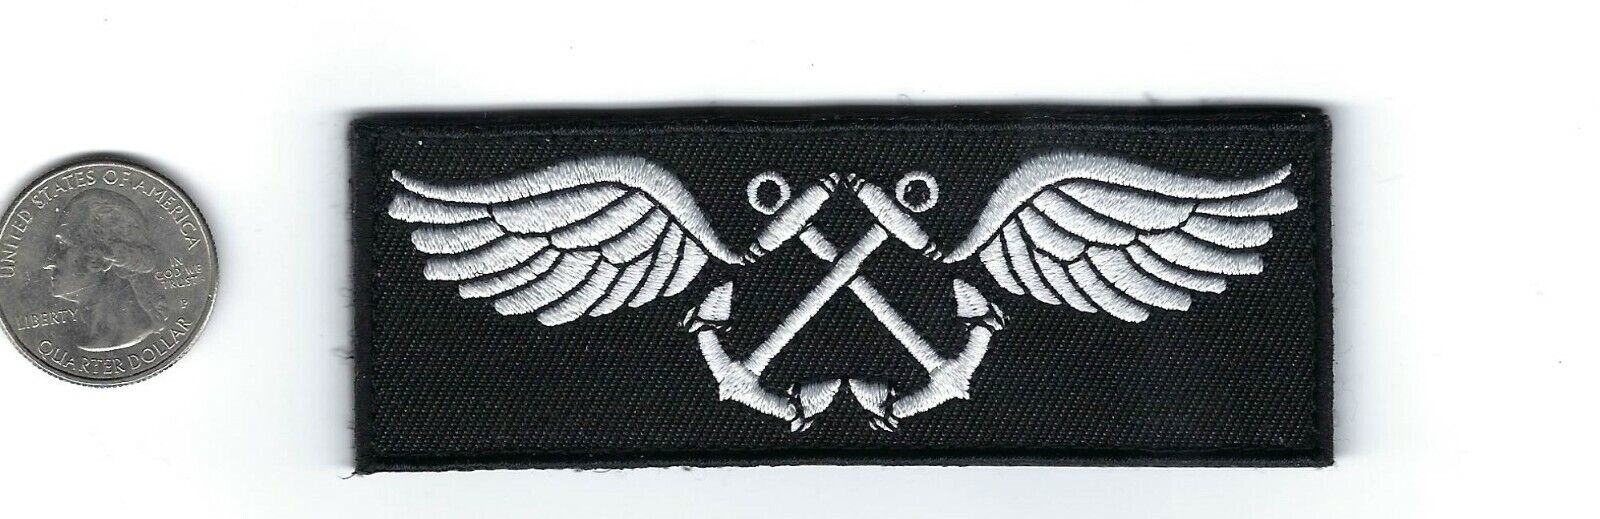 AB AVIATION BOATSWAIN'S MATE HANDLING FUEL EQUIPMENT ABE ABF ABH PATCH